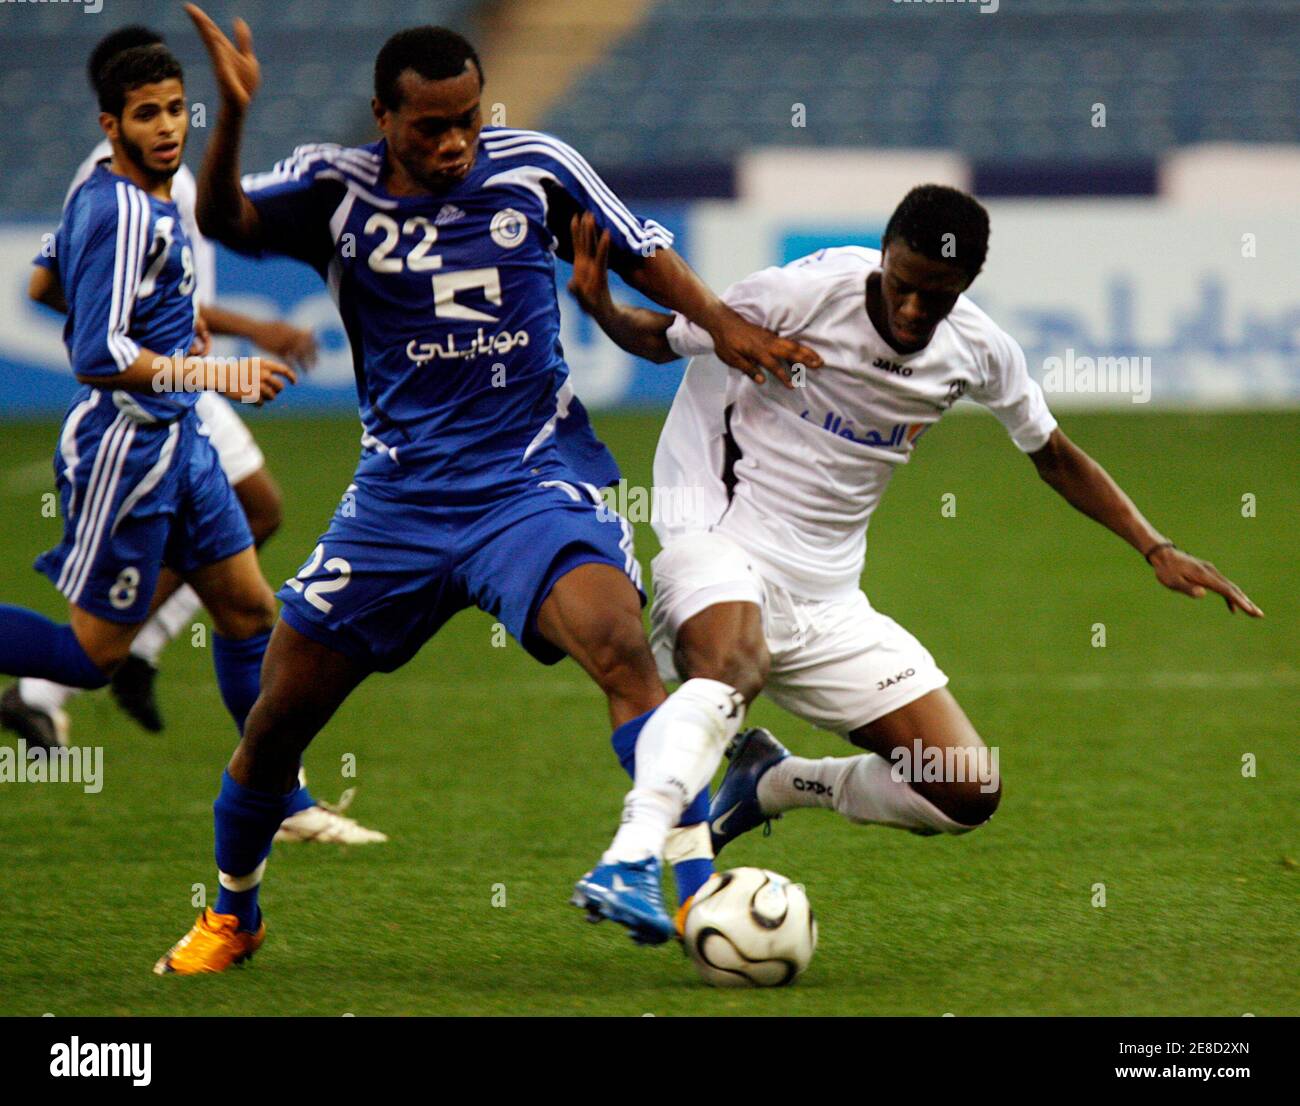 Al Hilal's Leo Blaez (L) fights for the ball with Al Shabab's Hassan Falateh during their Saudi Crown Prince Cup qualifying soccer match in Riyadh March 1, 2008. REUTERS/Fahad Shadeed (SAUDI ARABIA) Stock Photo